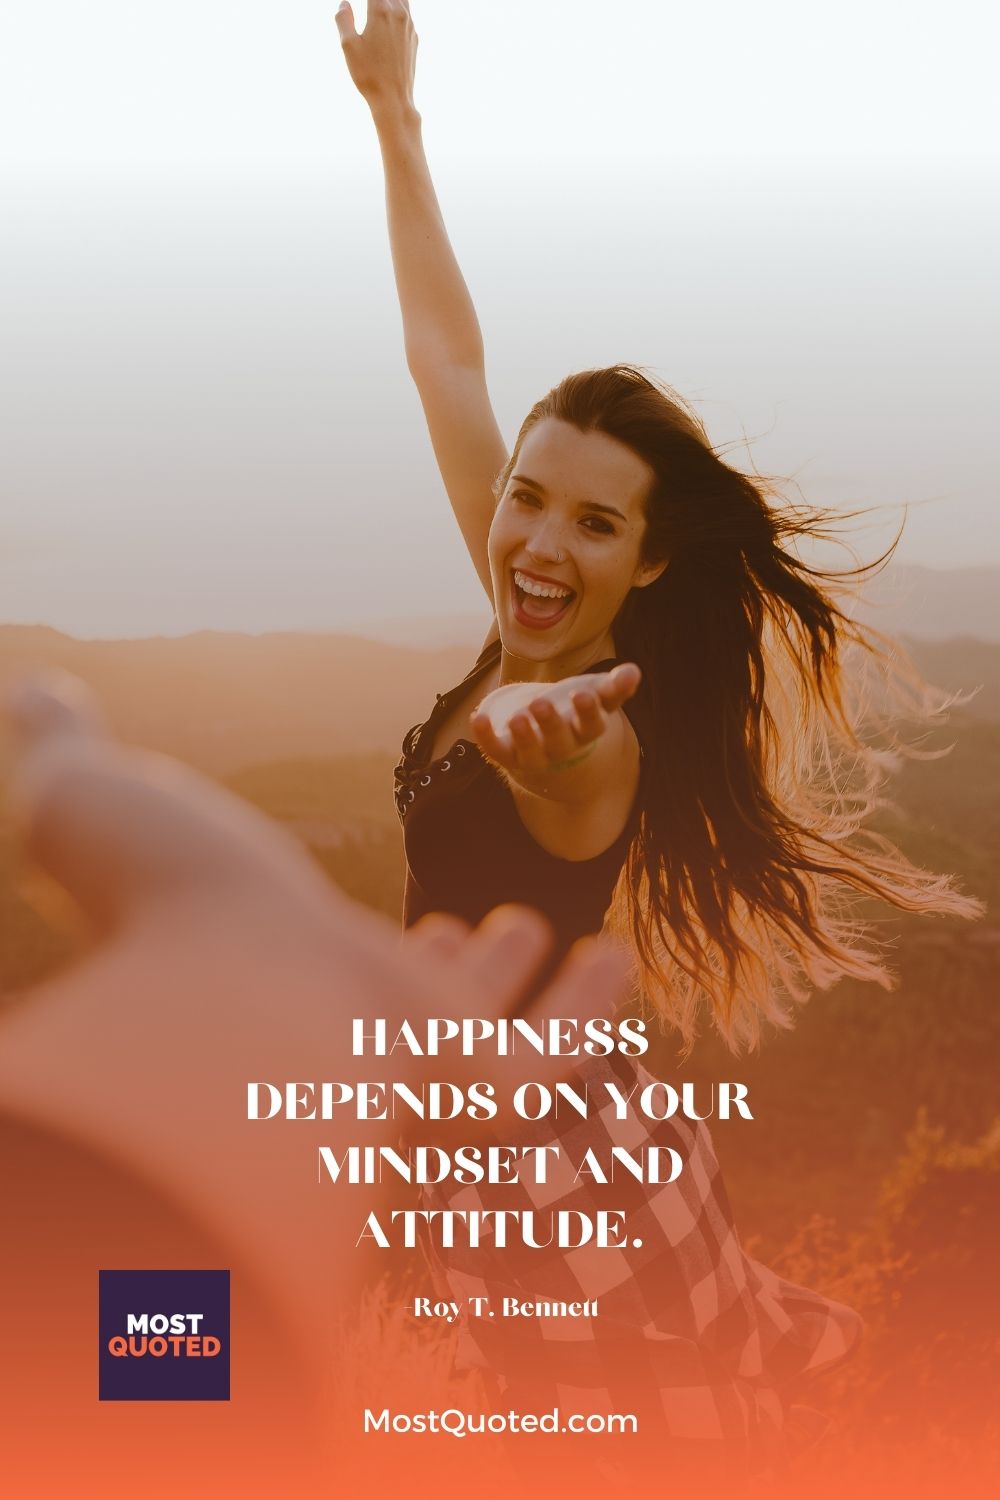 Happiness depends on your mindset and attitude. - Roy T. Bennett